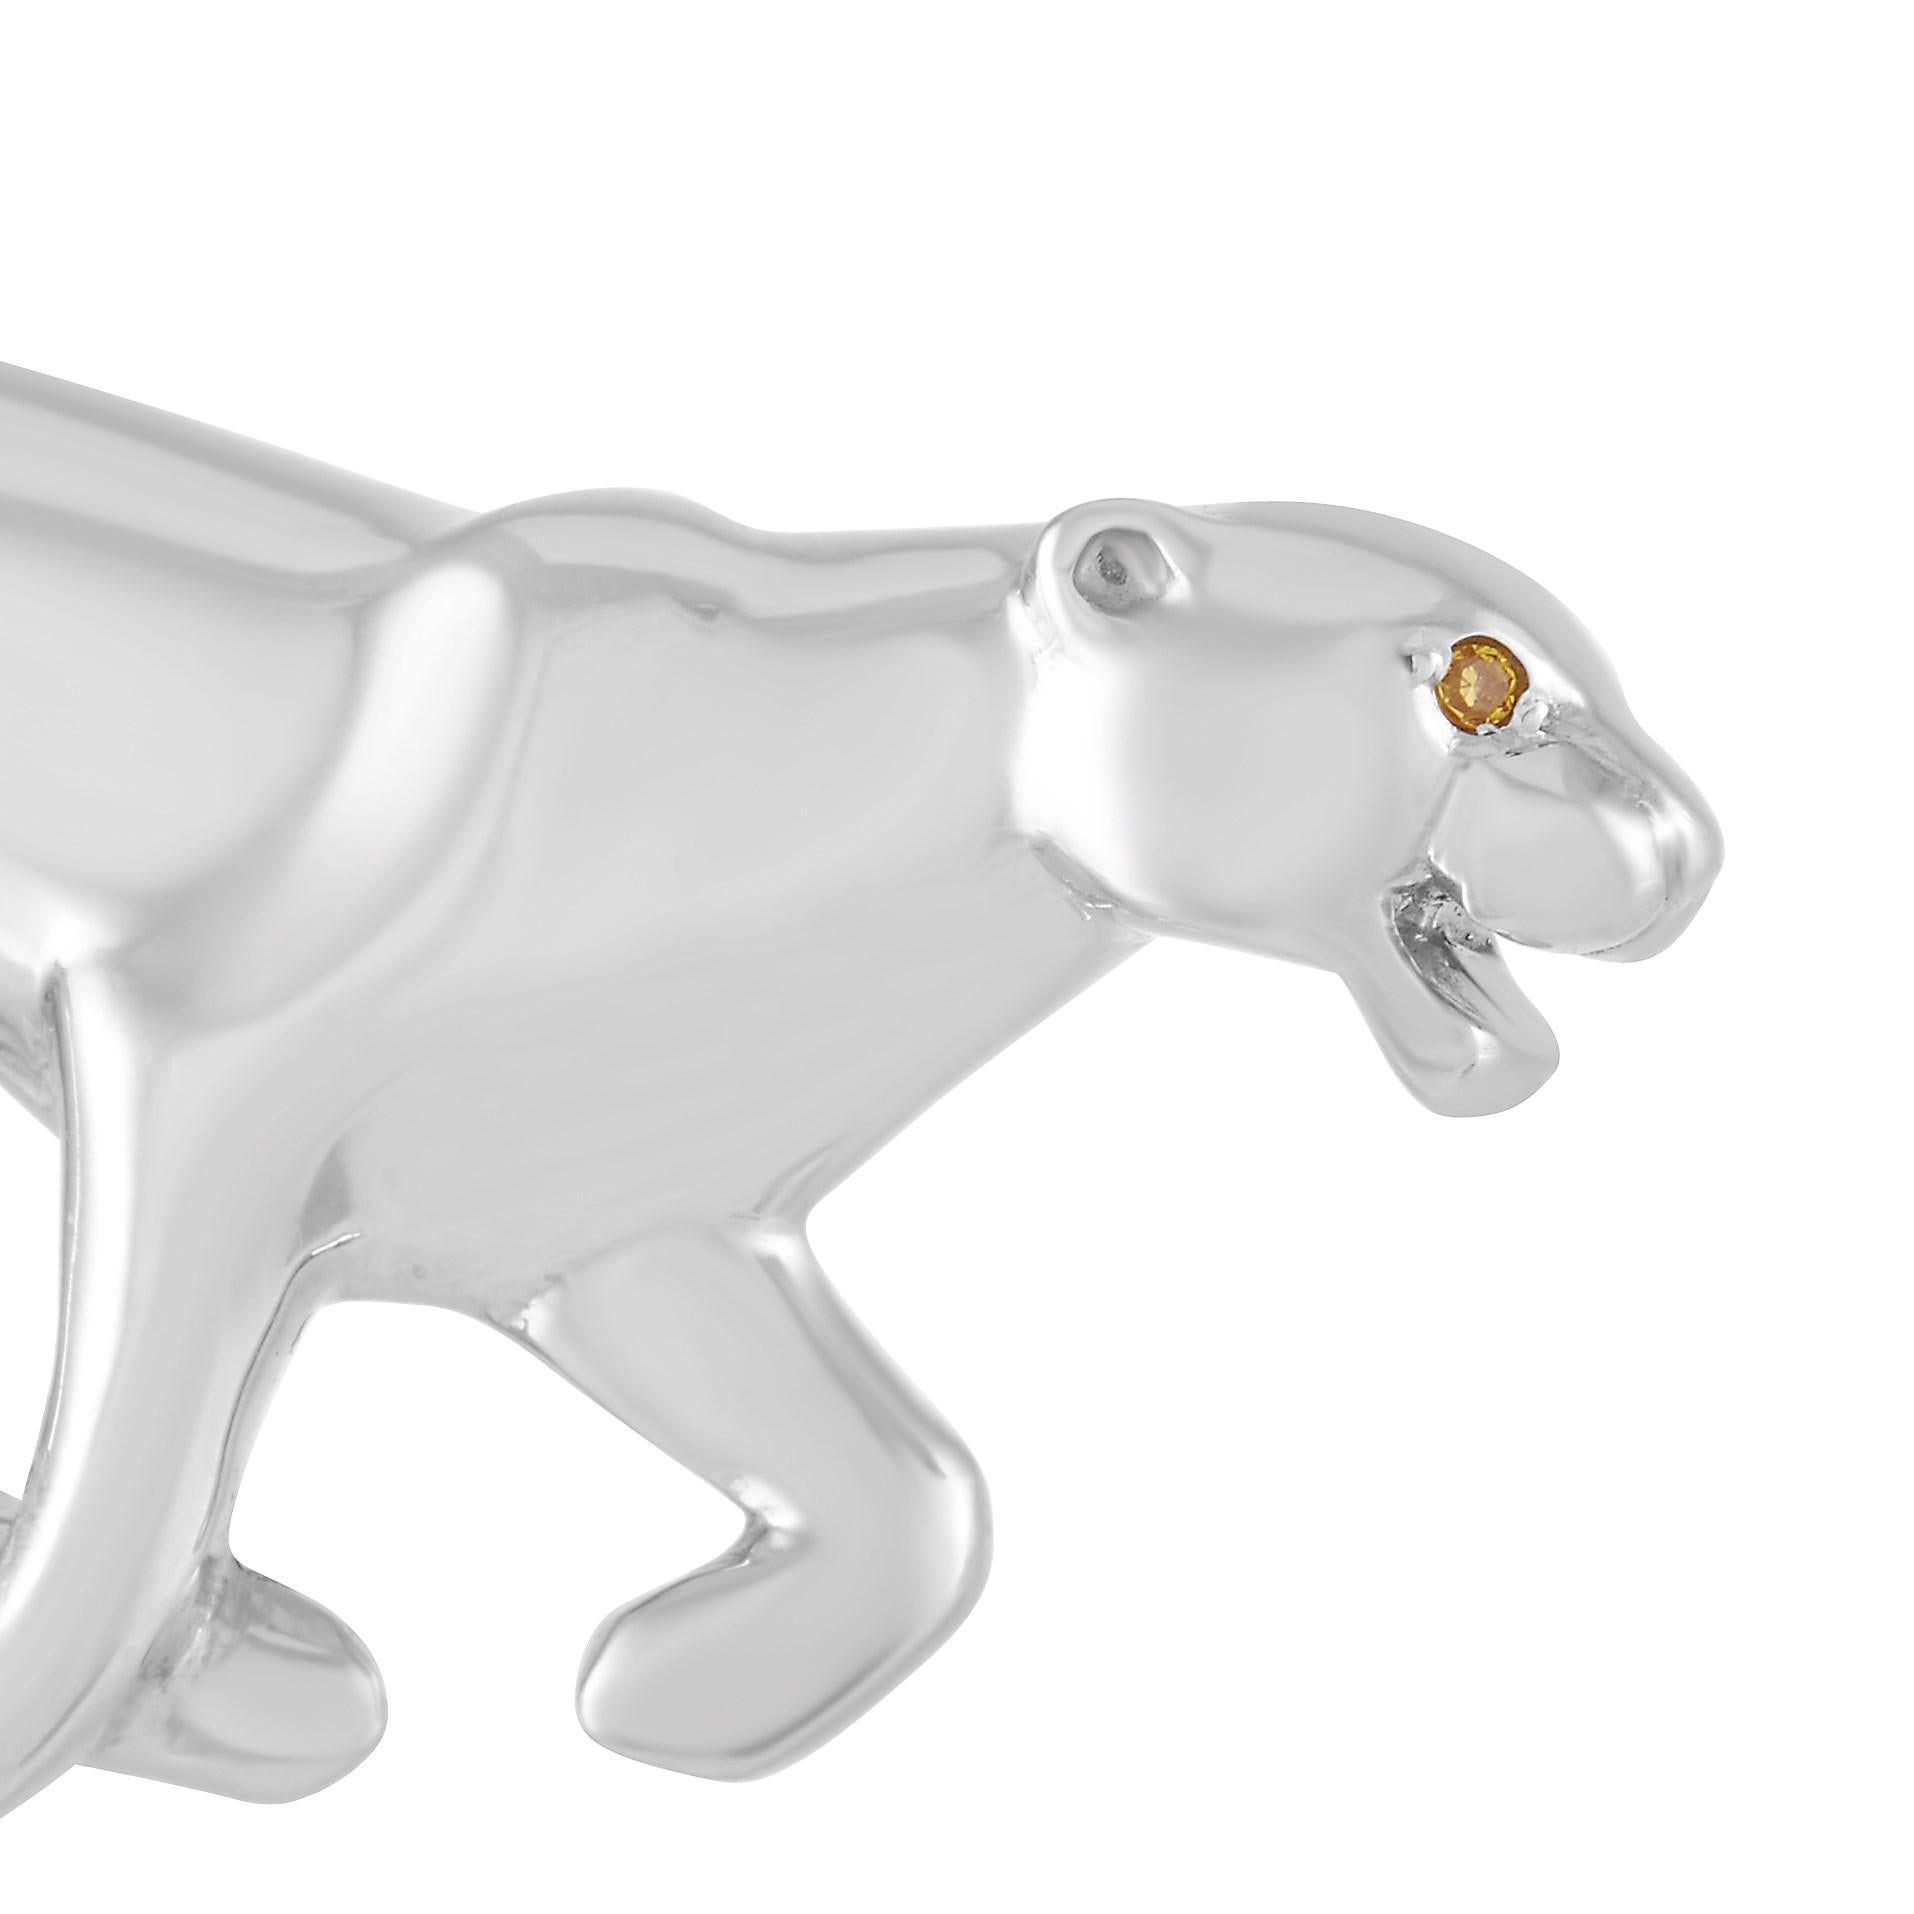 This Cartier 18K White Gold Panthère Brooch is a unique piece. The brooch is made from 18K White Gold in the shape of a panther and set with a round gemstone for the eye. The brooch measures 0.63 inches by 1.38 inches and weighs 10.8 grams.

This